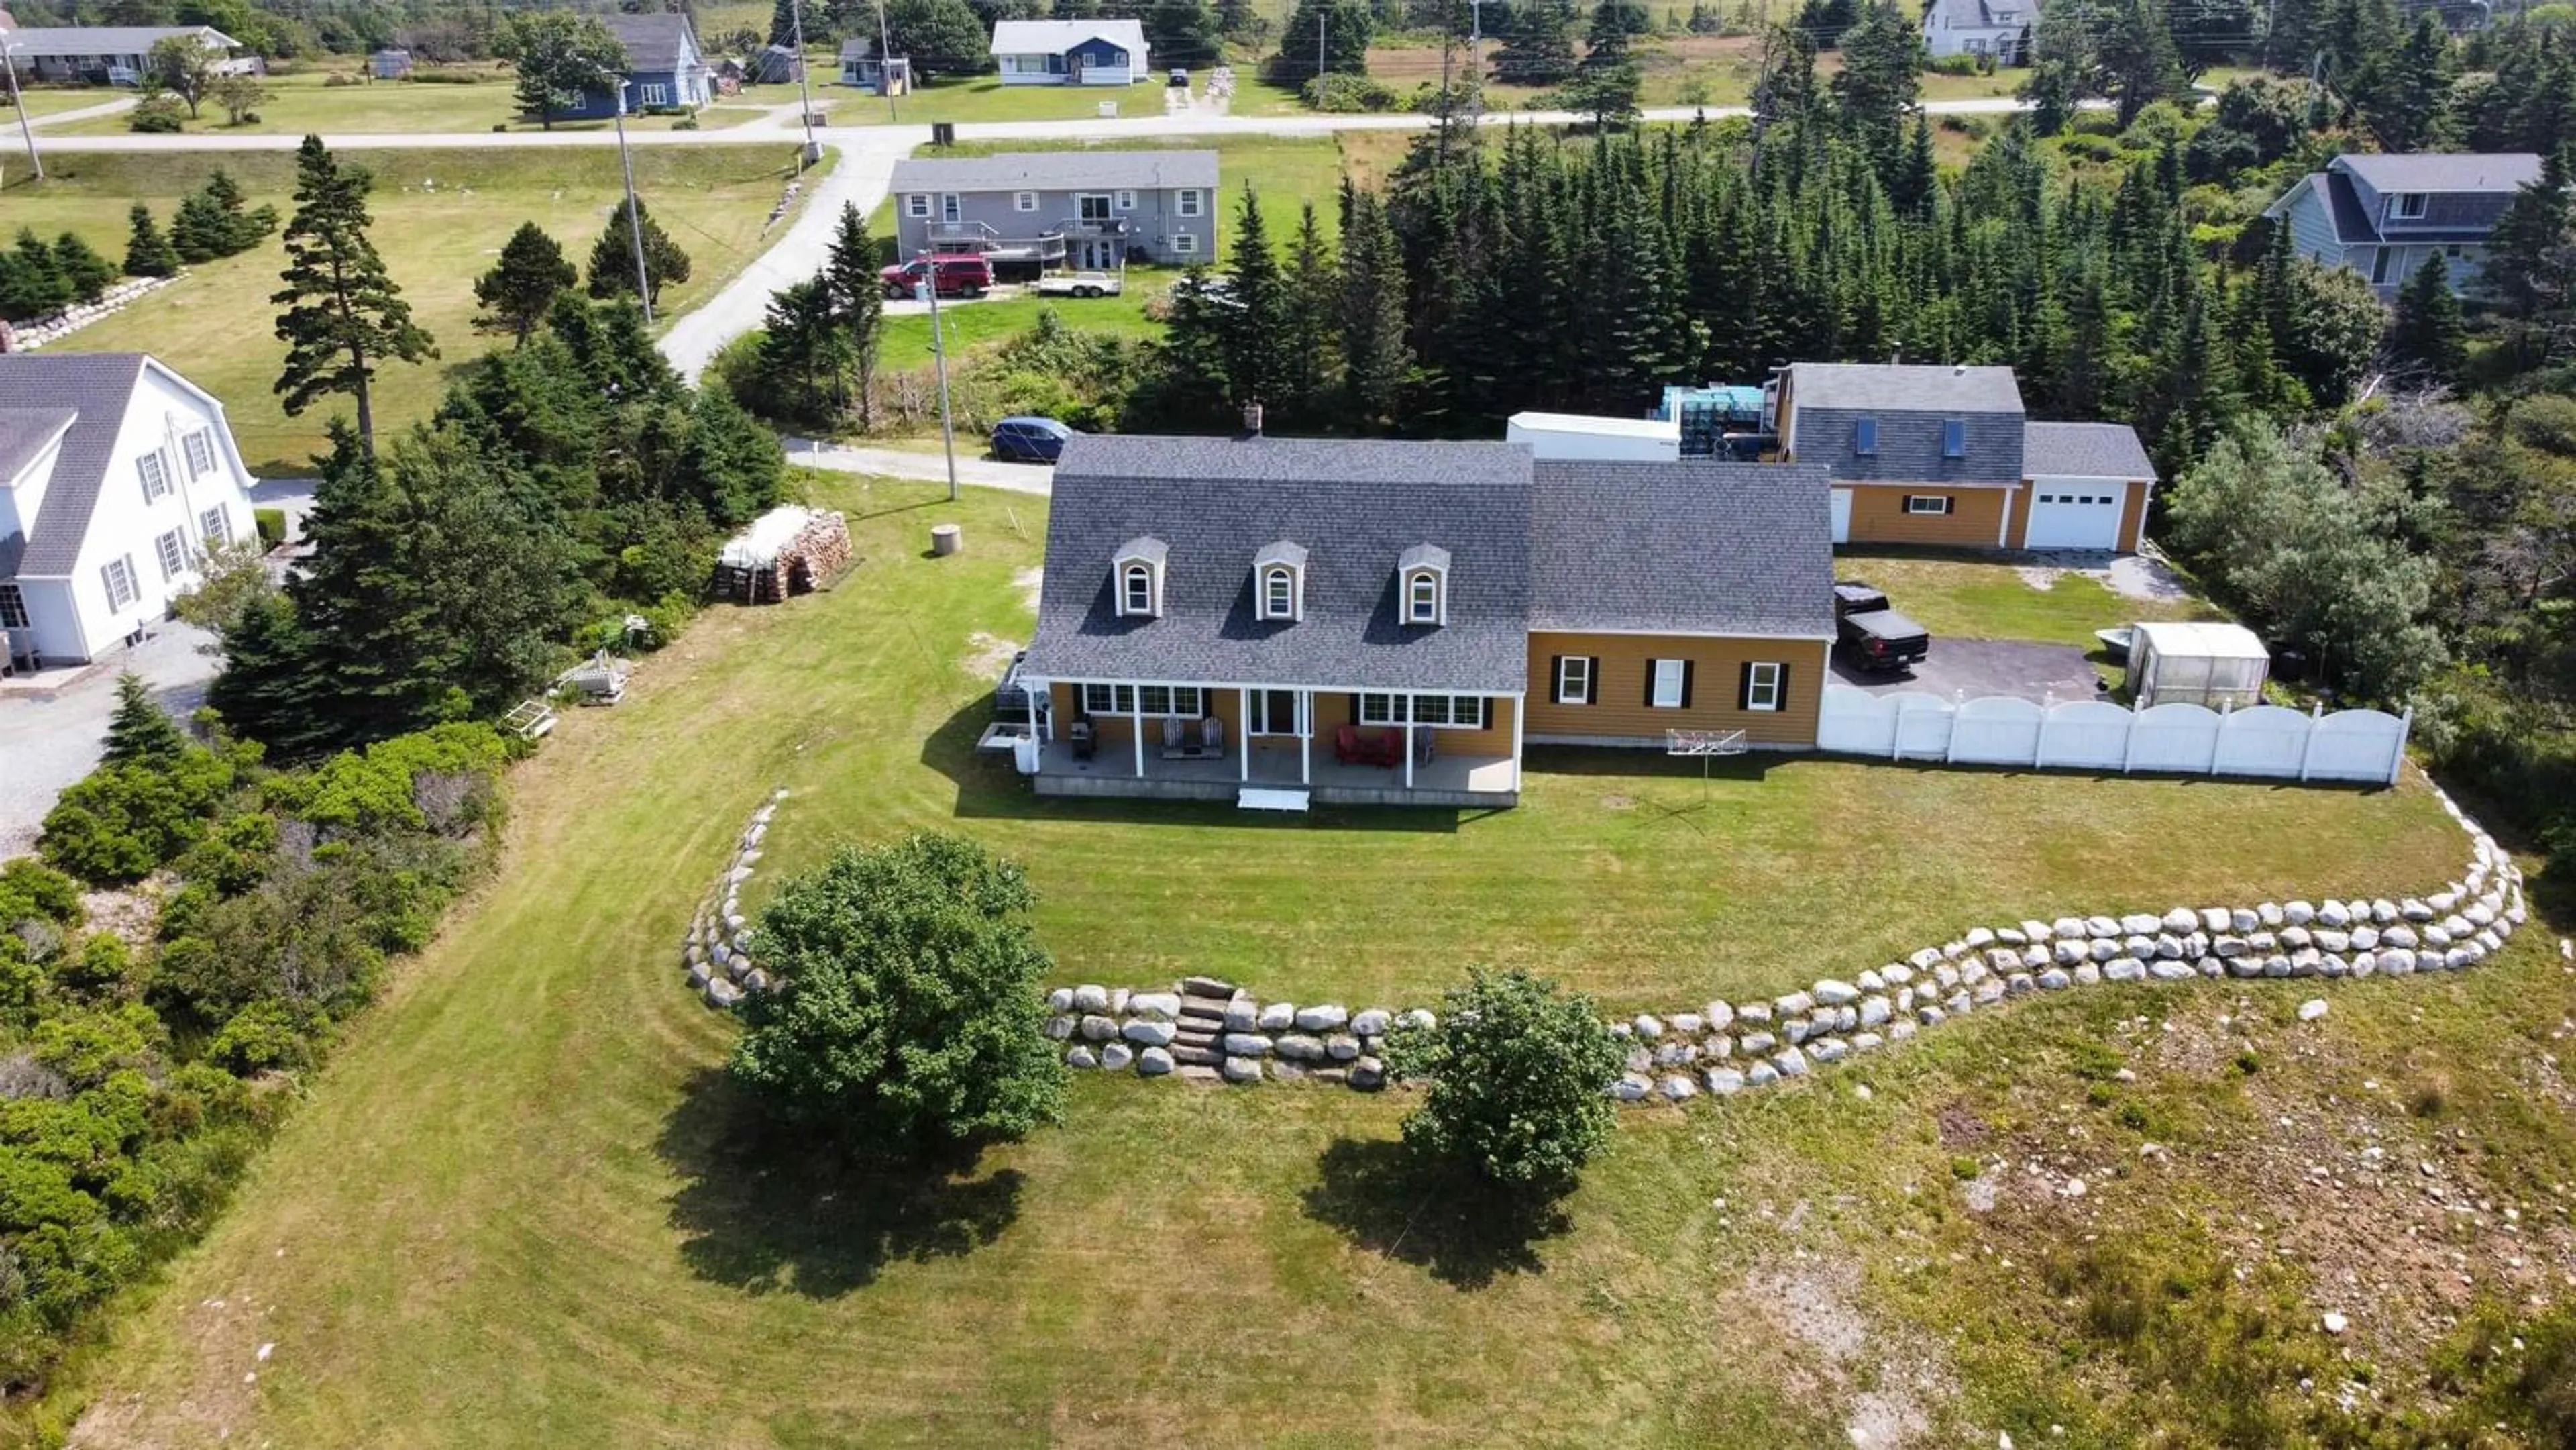 Outside view for 850 330 Hwy, Centreville Nova Scotia B0W 2G0